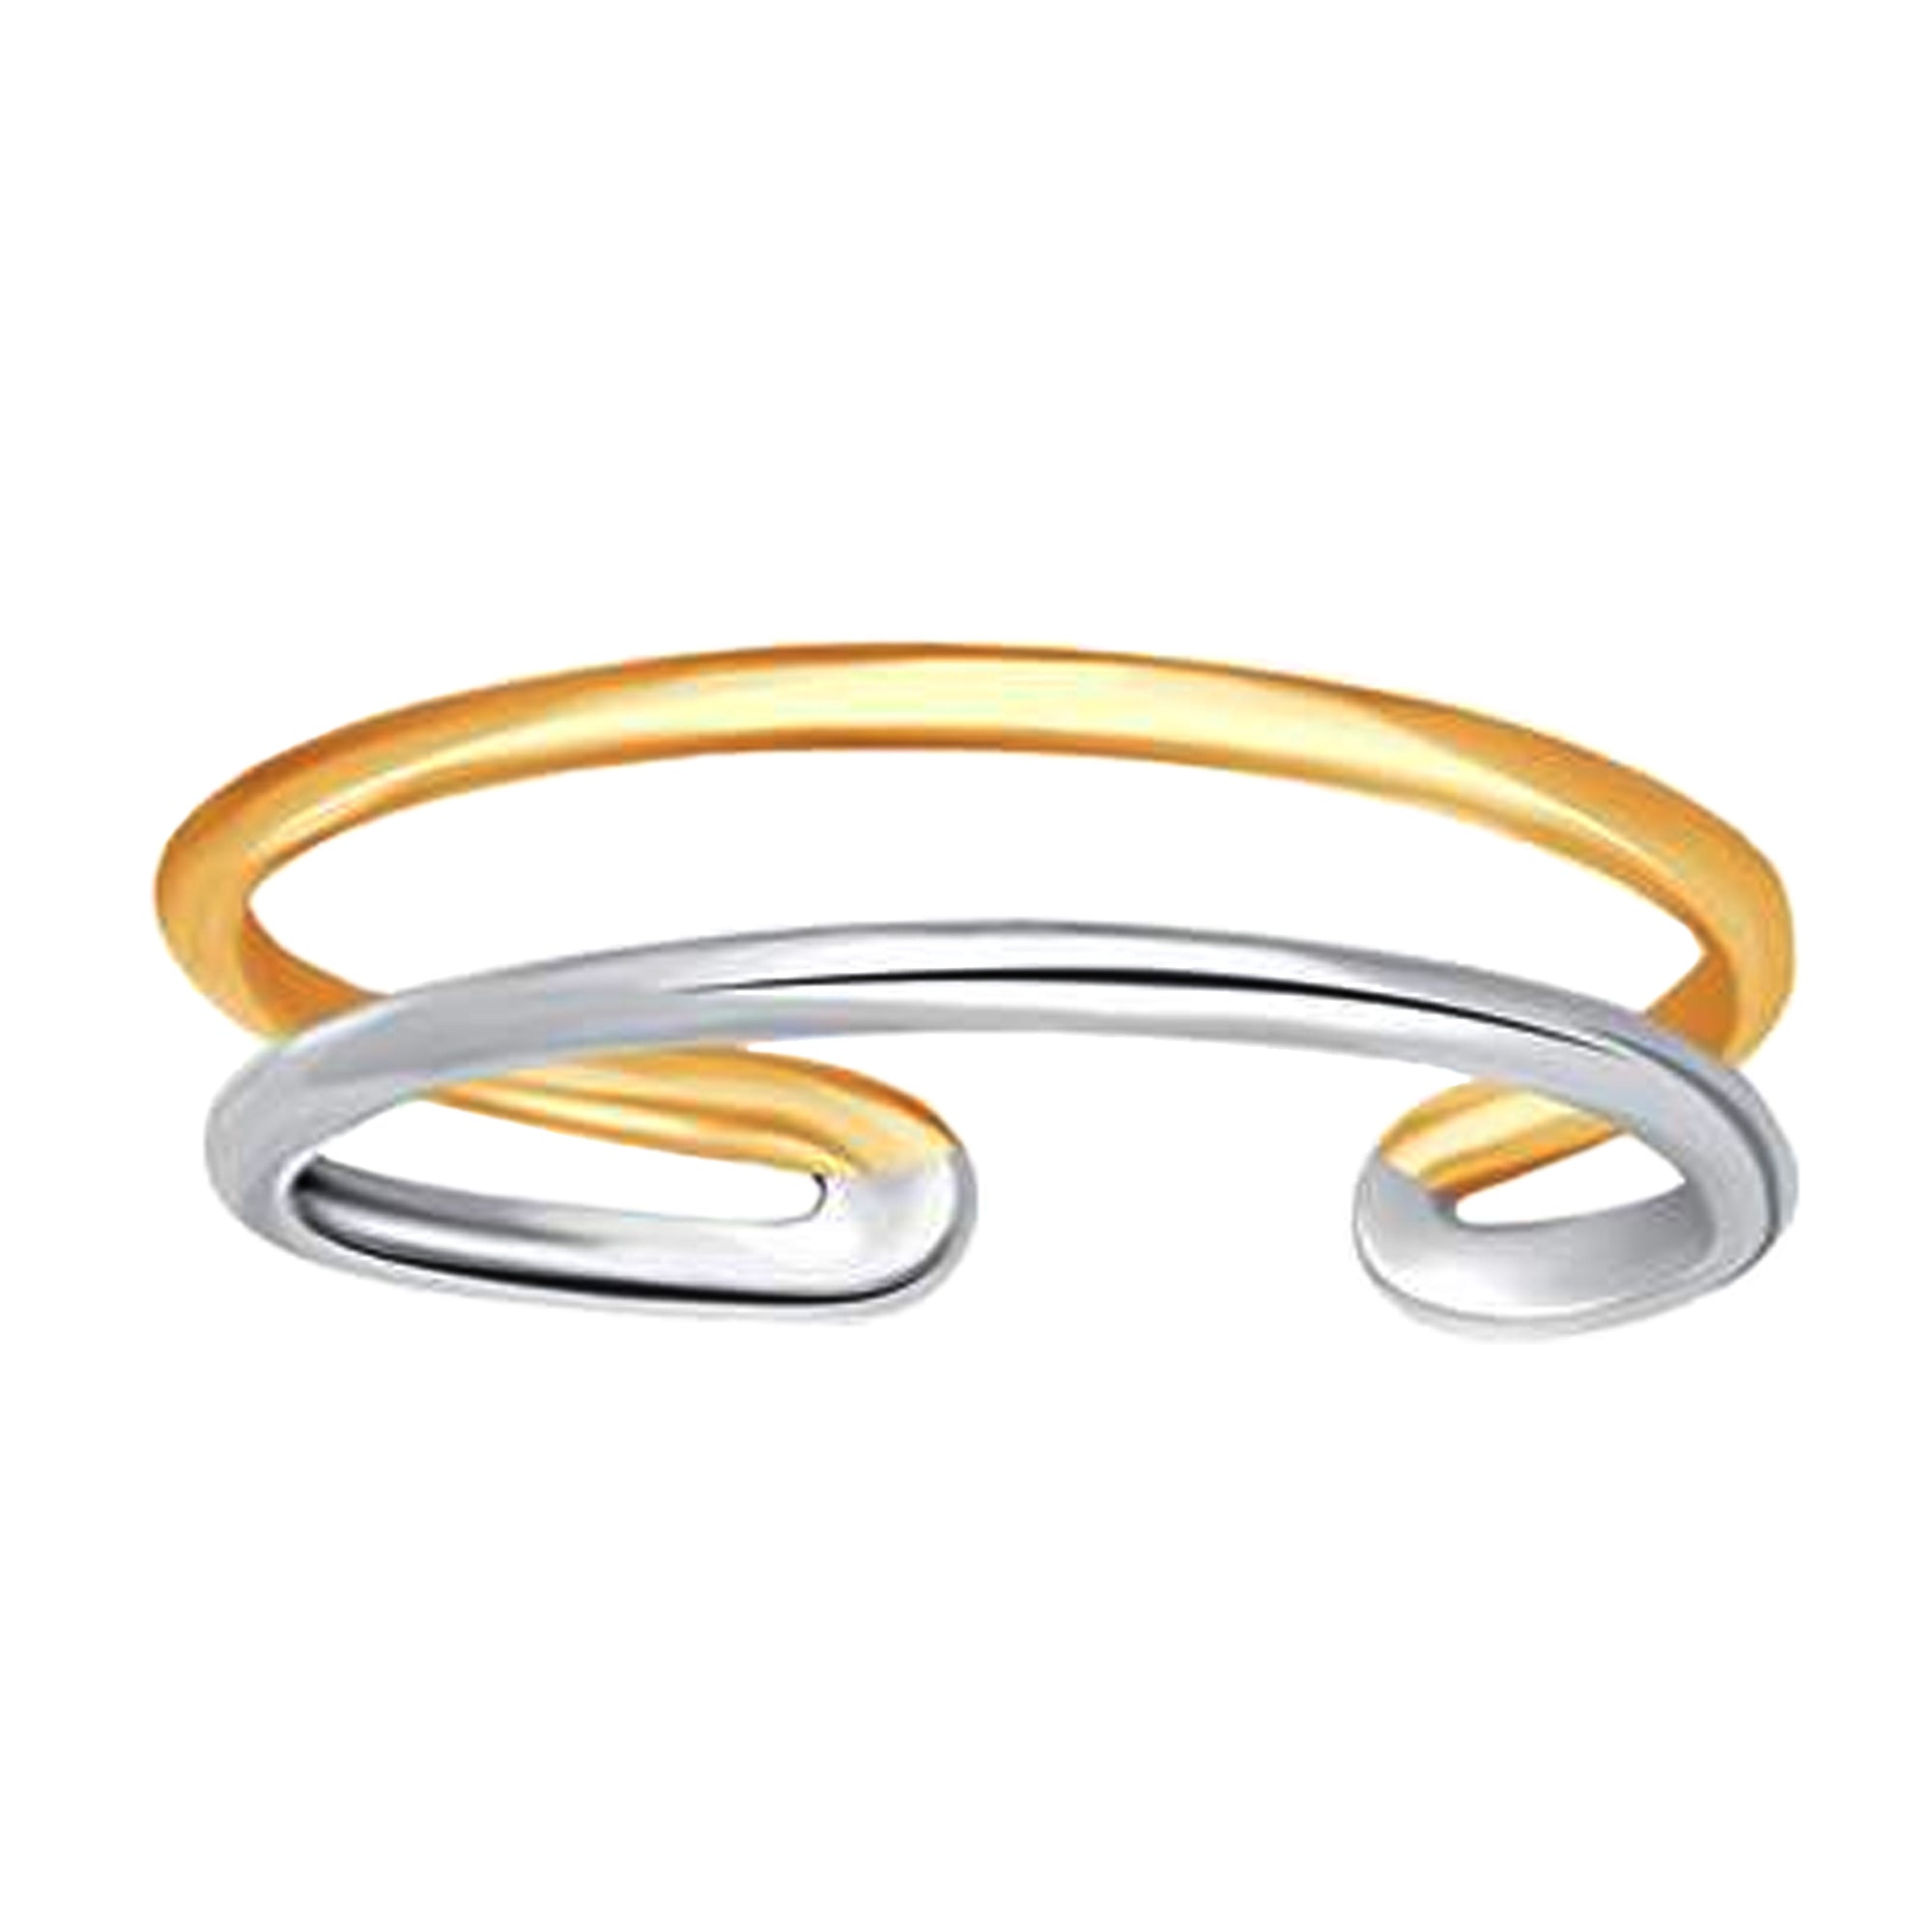 14K White And Yellow Gold Double Bar Cuff Style Adjustable Toe Ring fine designer jewelry for men and women